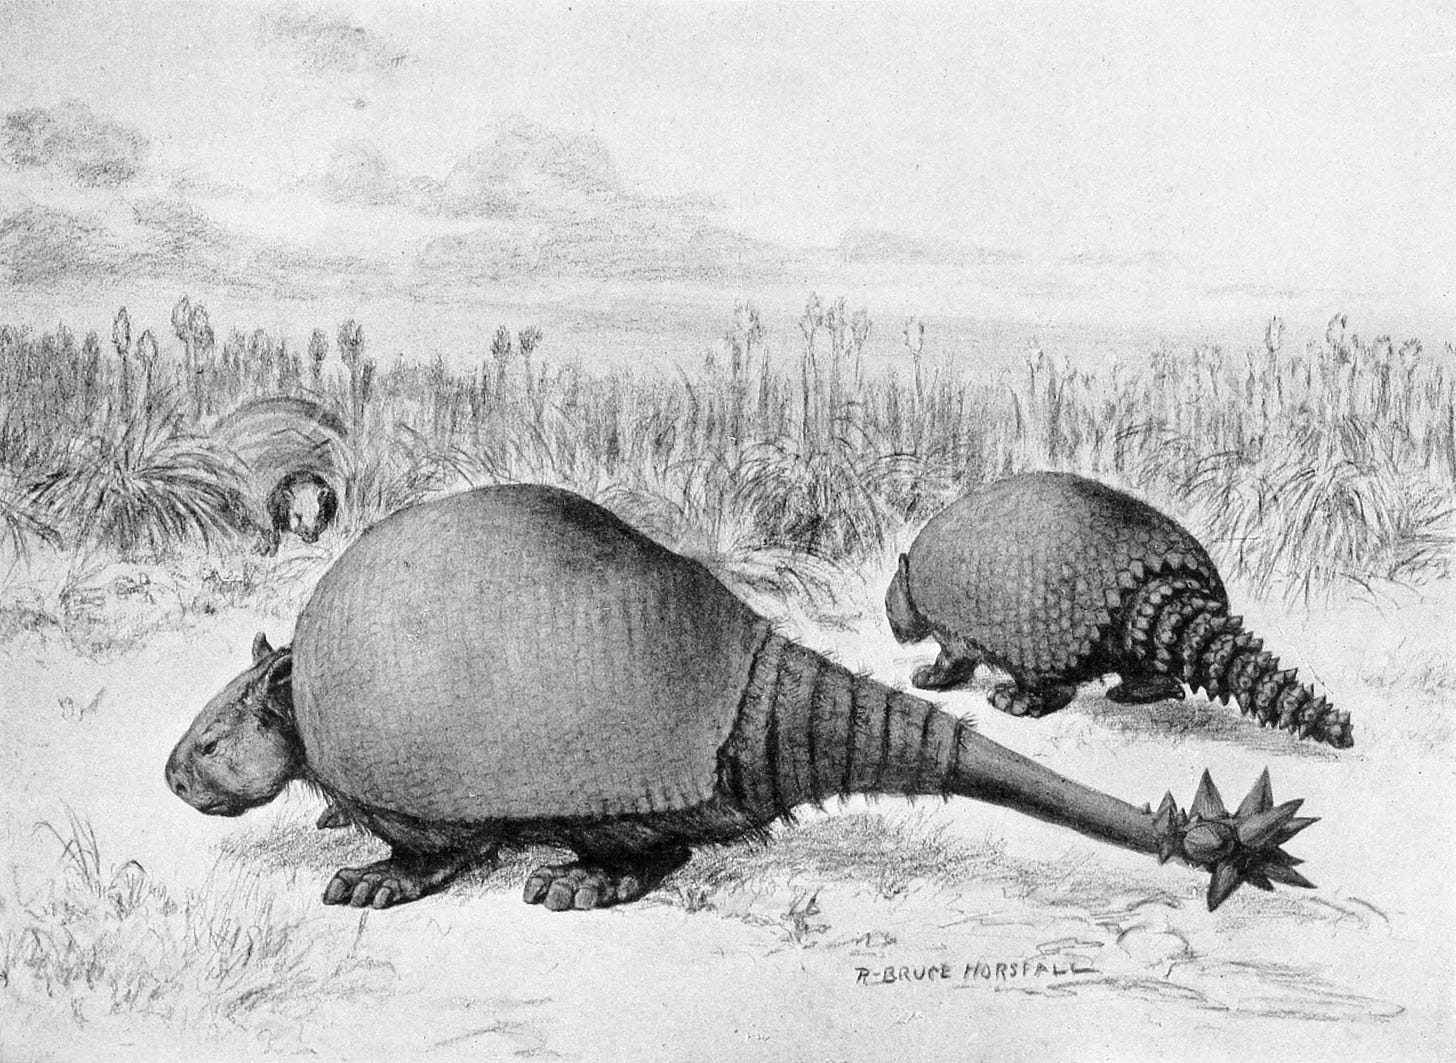 1913 reconstruction of Doedicurus and Glyptodon by Robert Bruce Horsfall